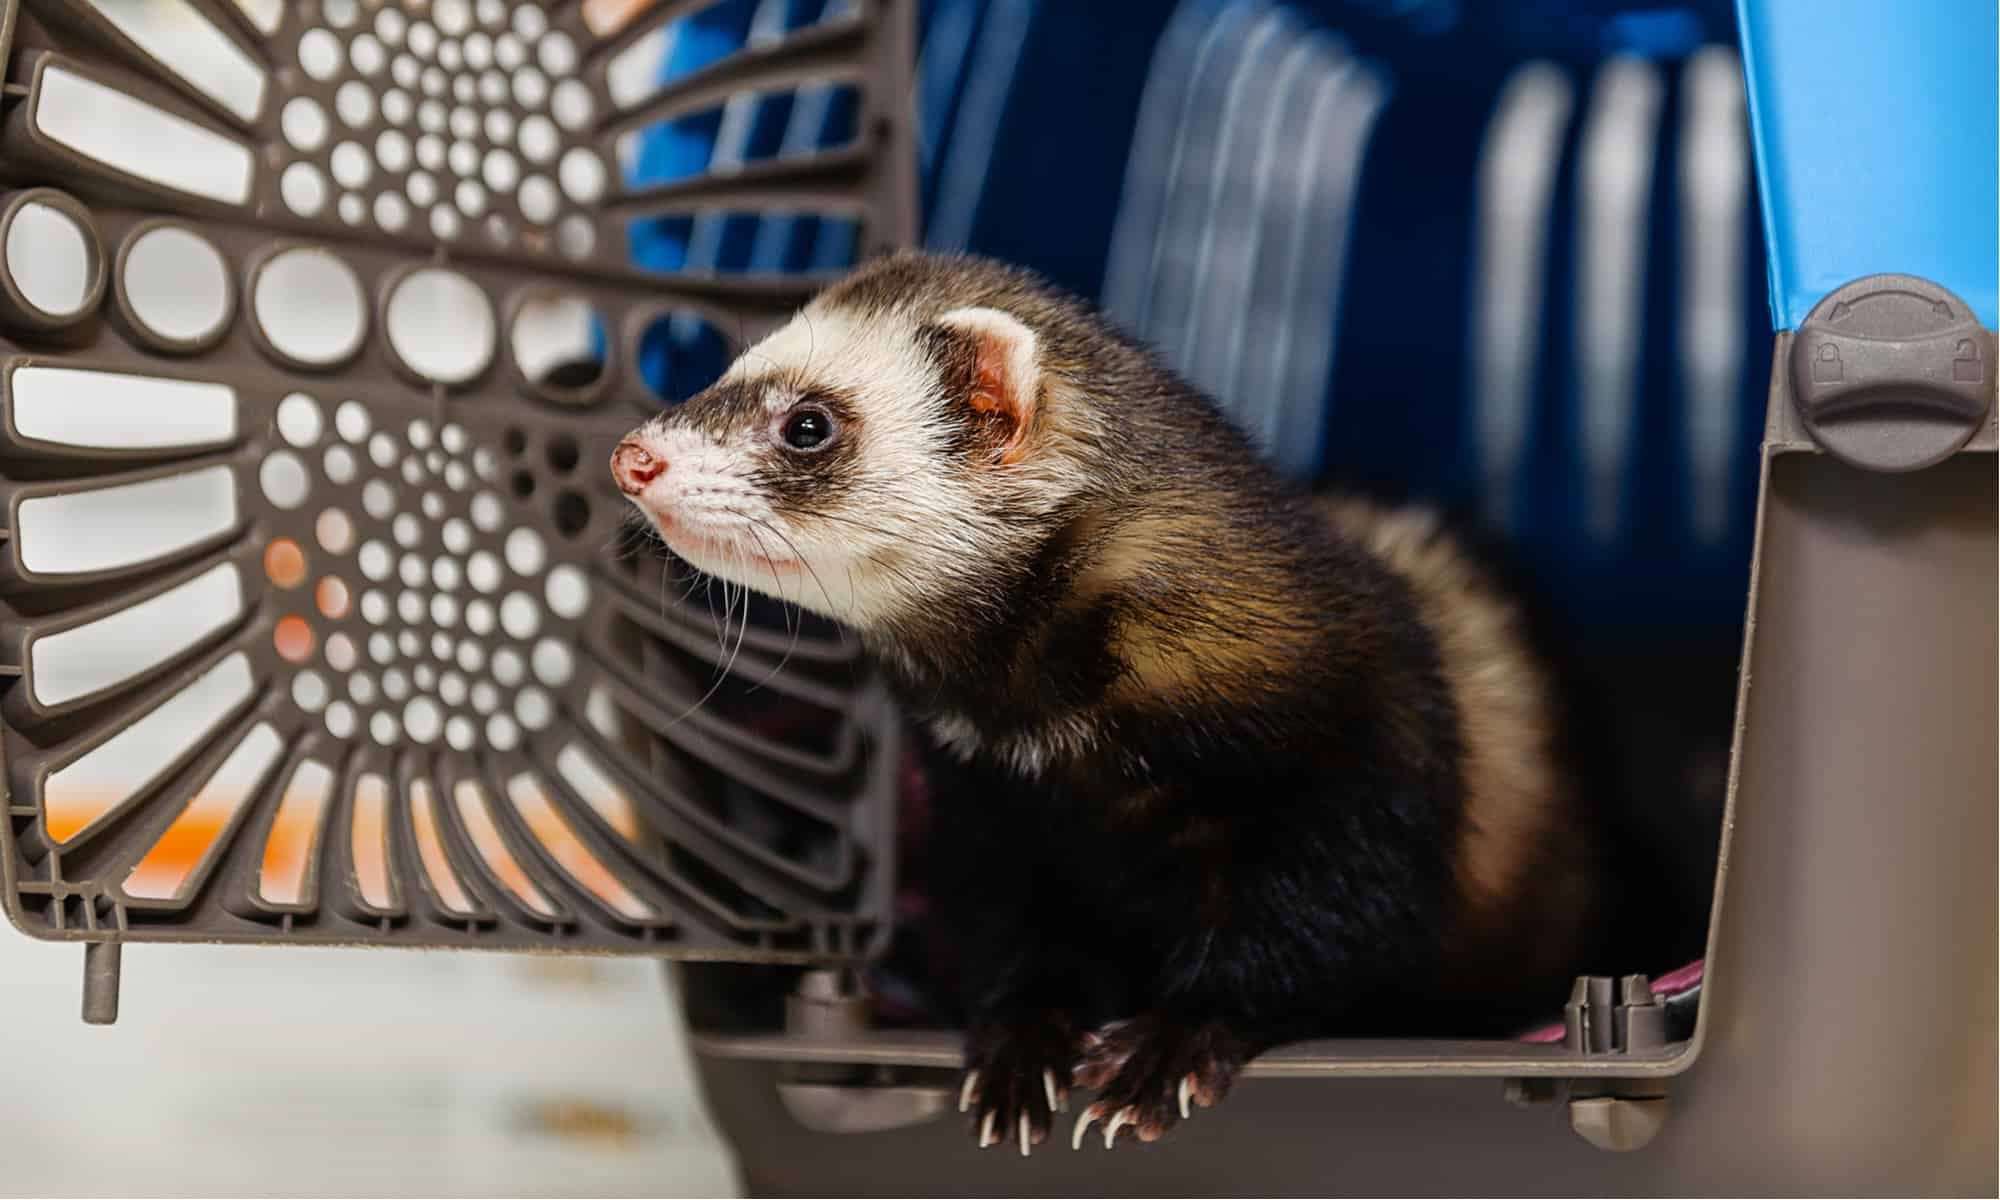 How To Train A Ferret To Use A Litter Box